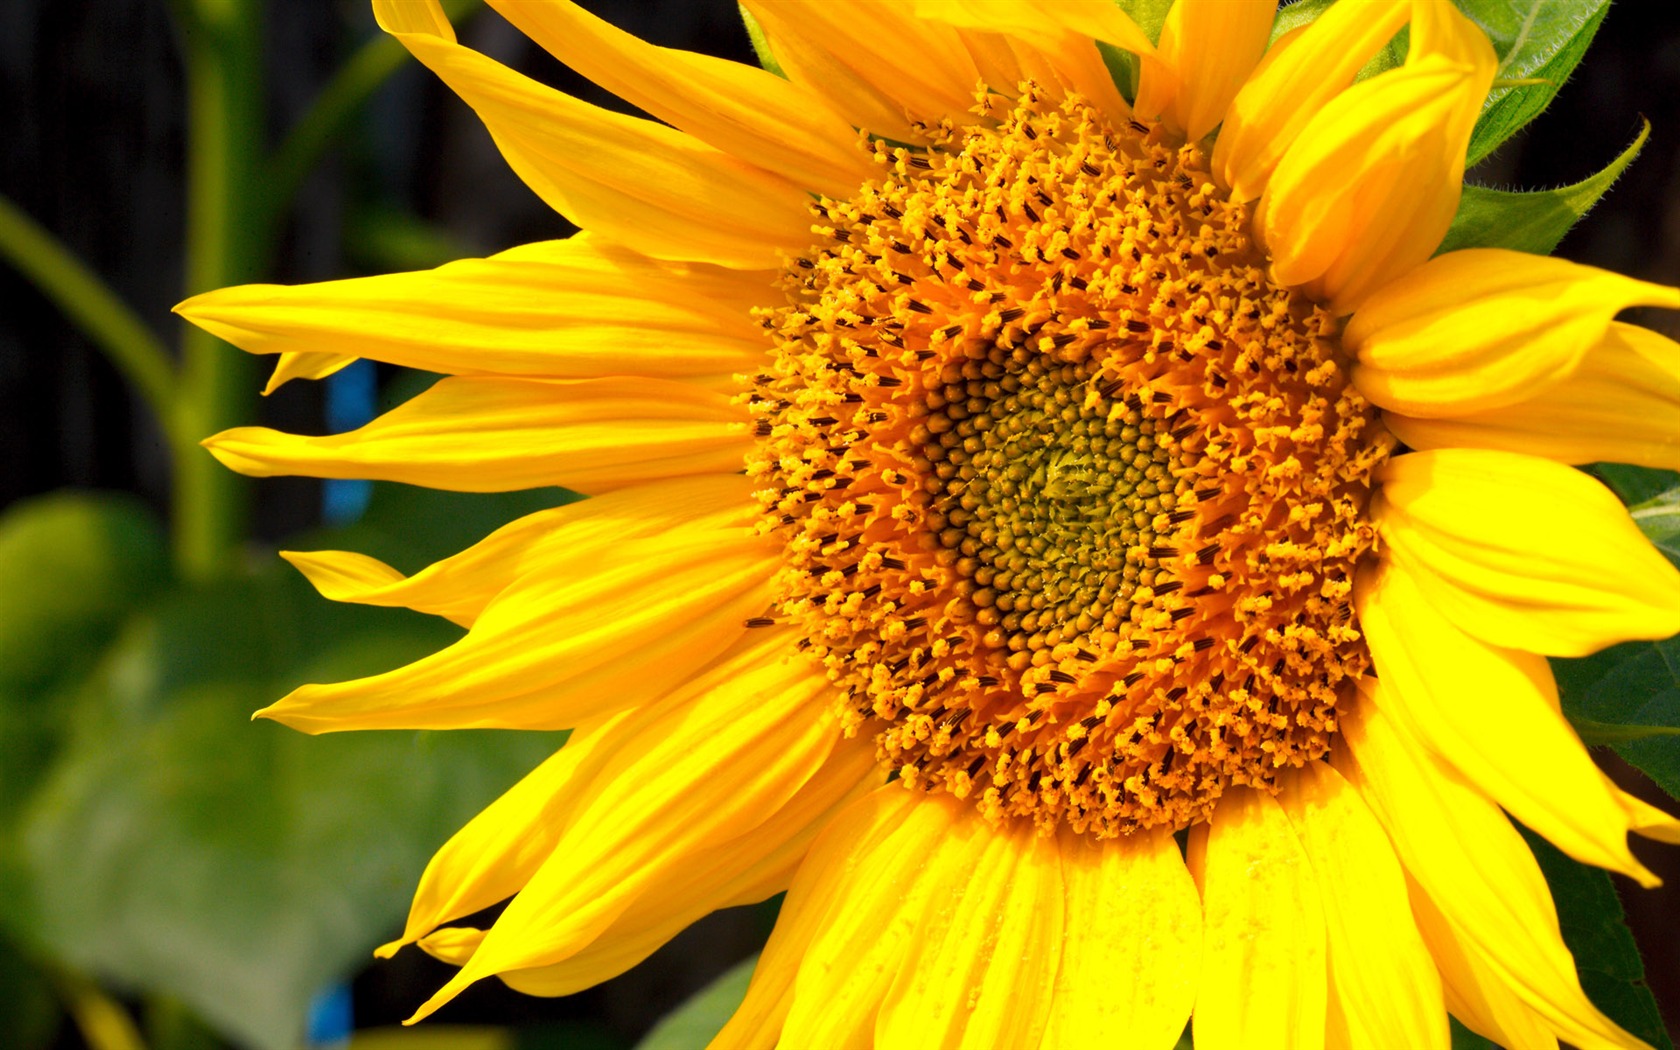 Sunny sunflower photo HD Wallpapers #37 - 1680x1050